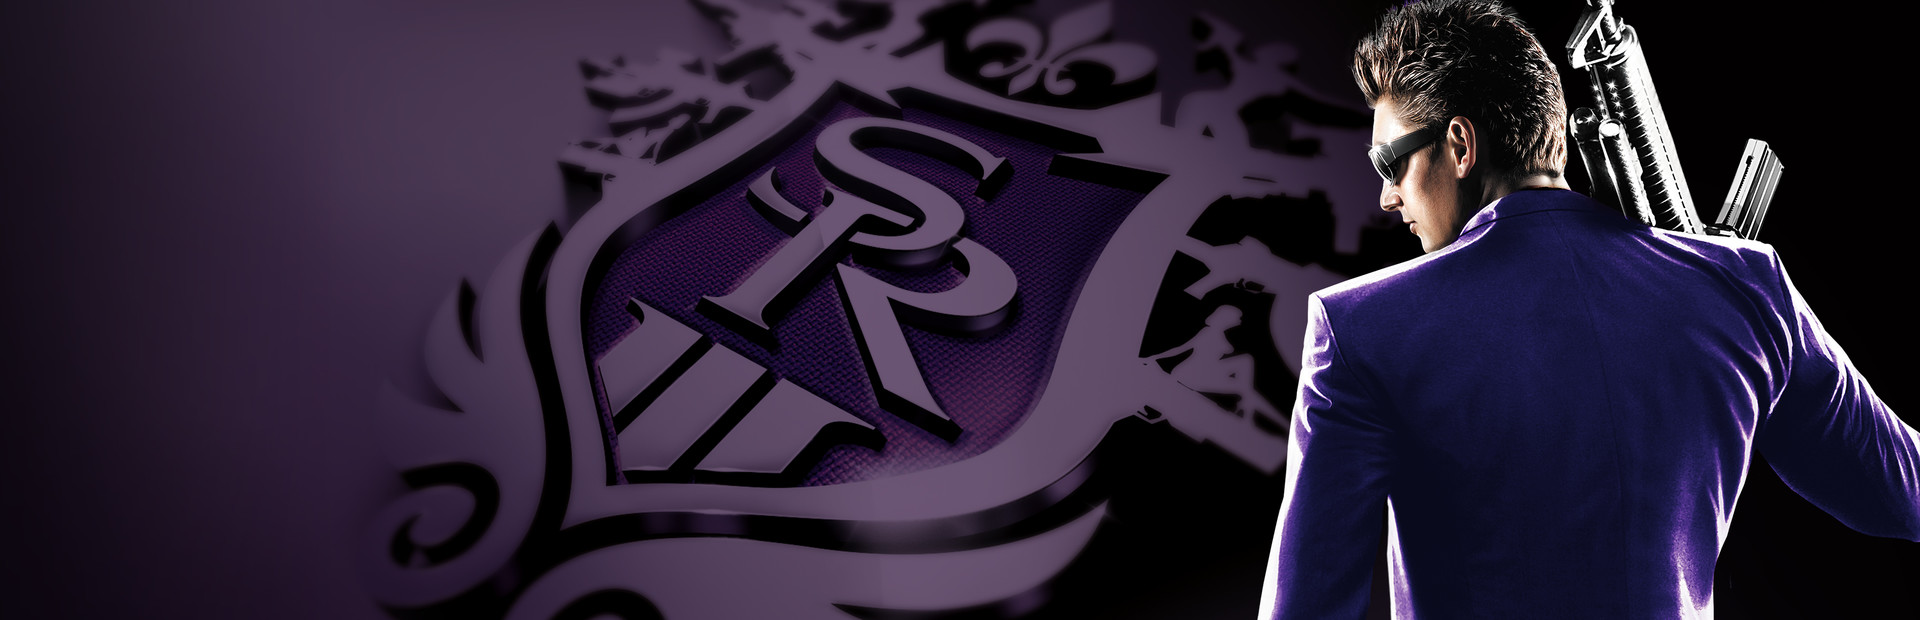 Saints Row: The Third cover image